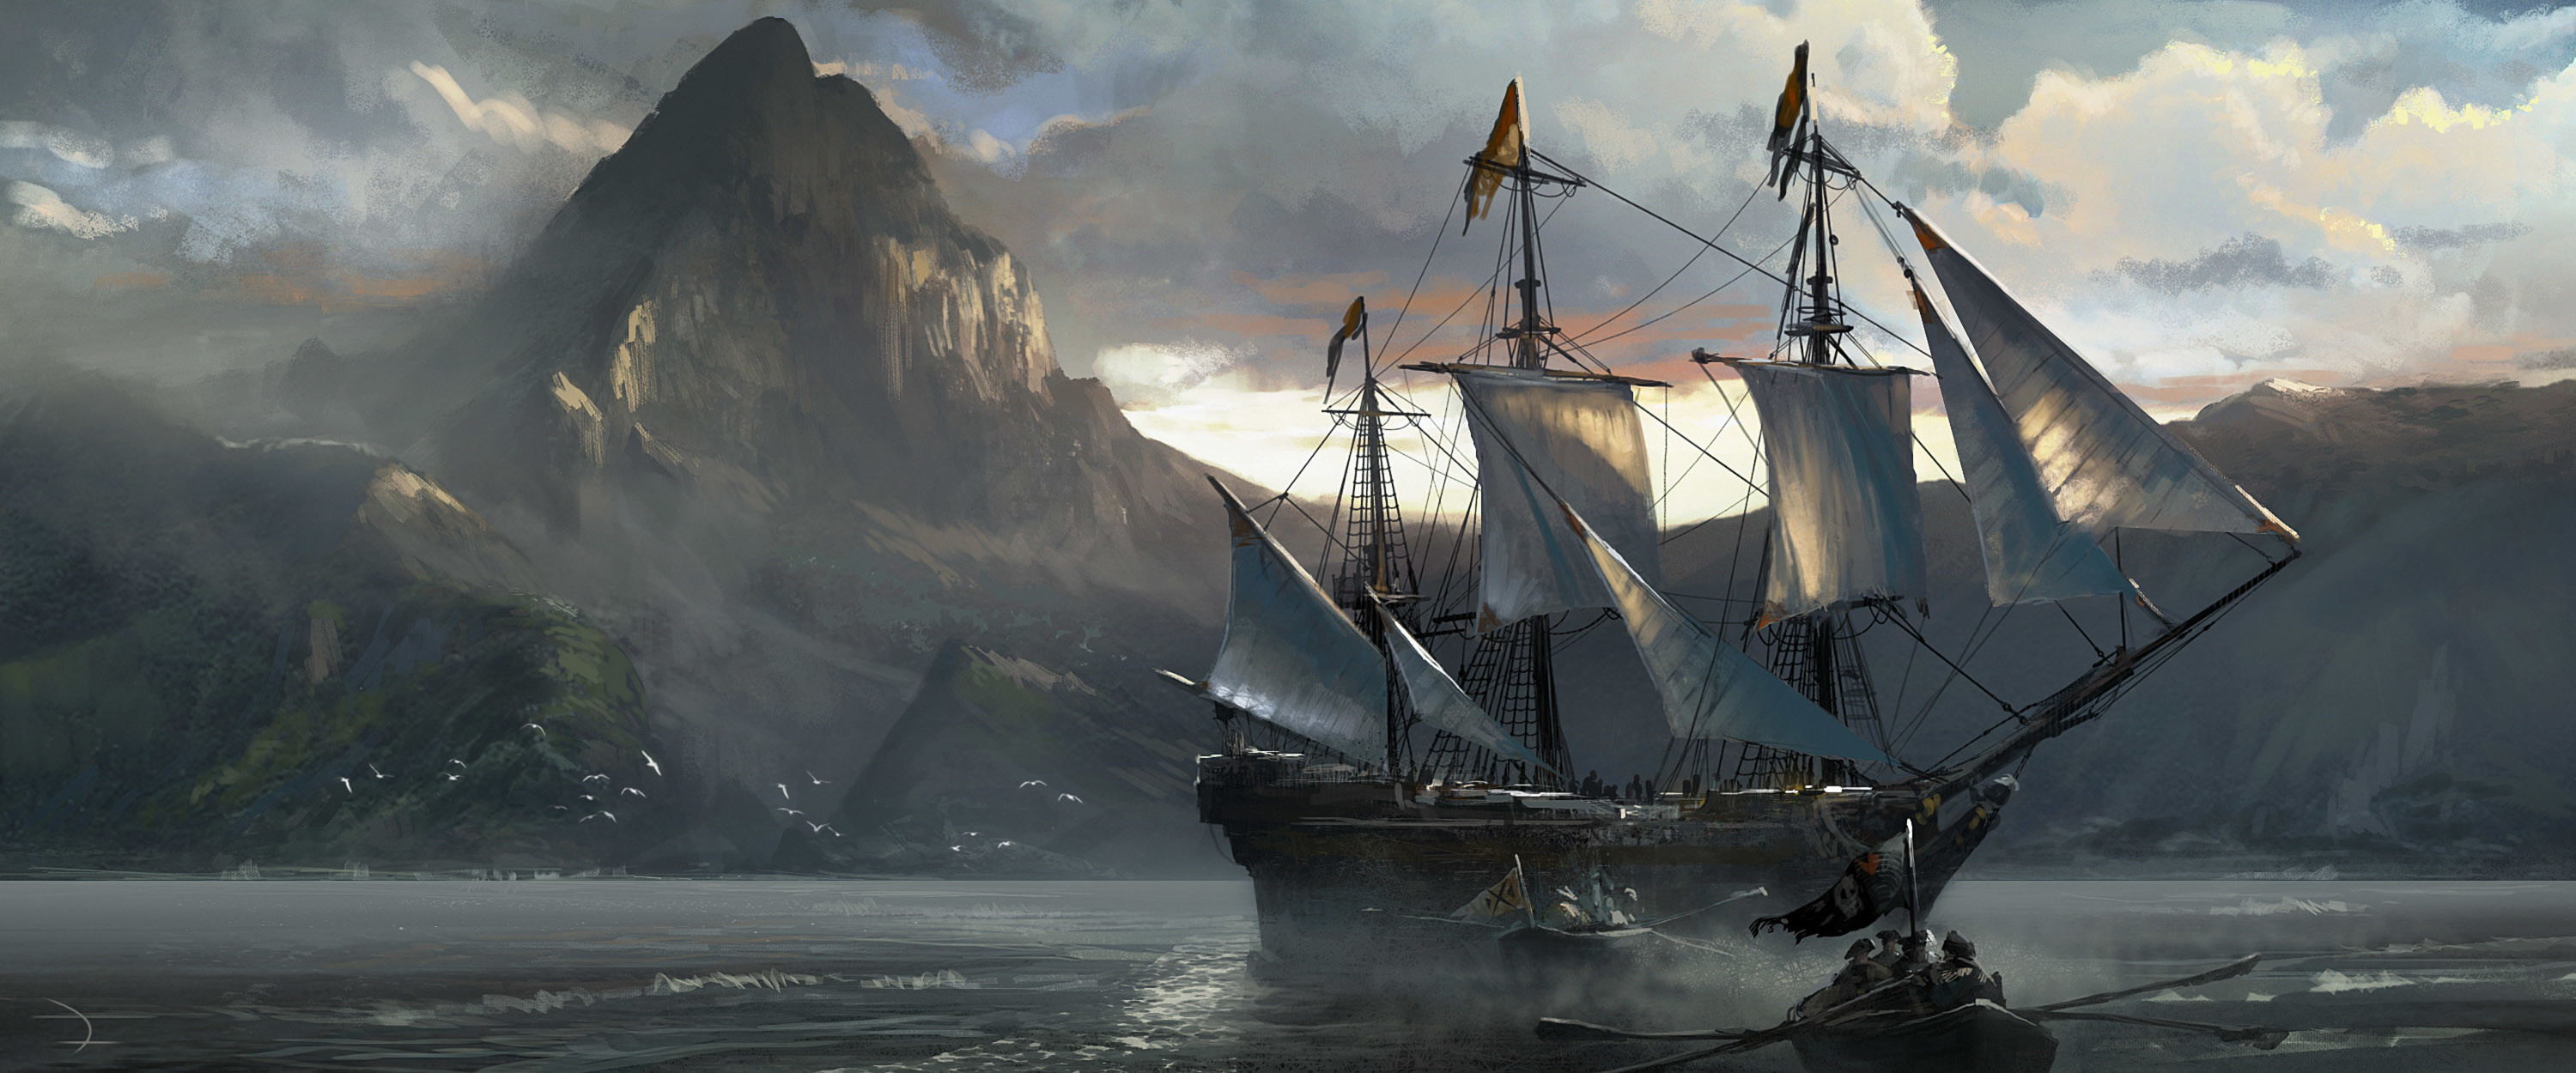 Jackdaw Ship wallpapers, Gaming, Pics, Background pictures, 3000x1250 Dual Screen Desktop